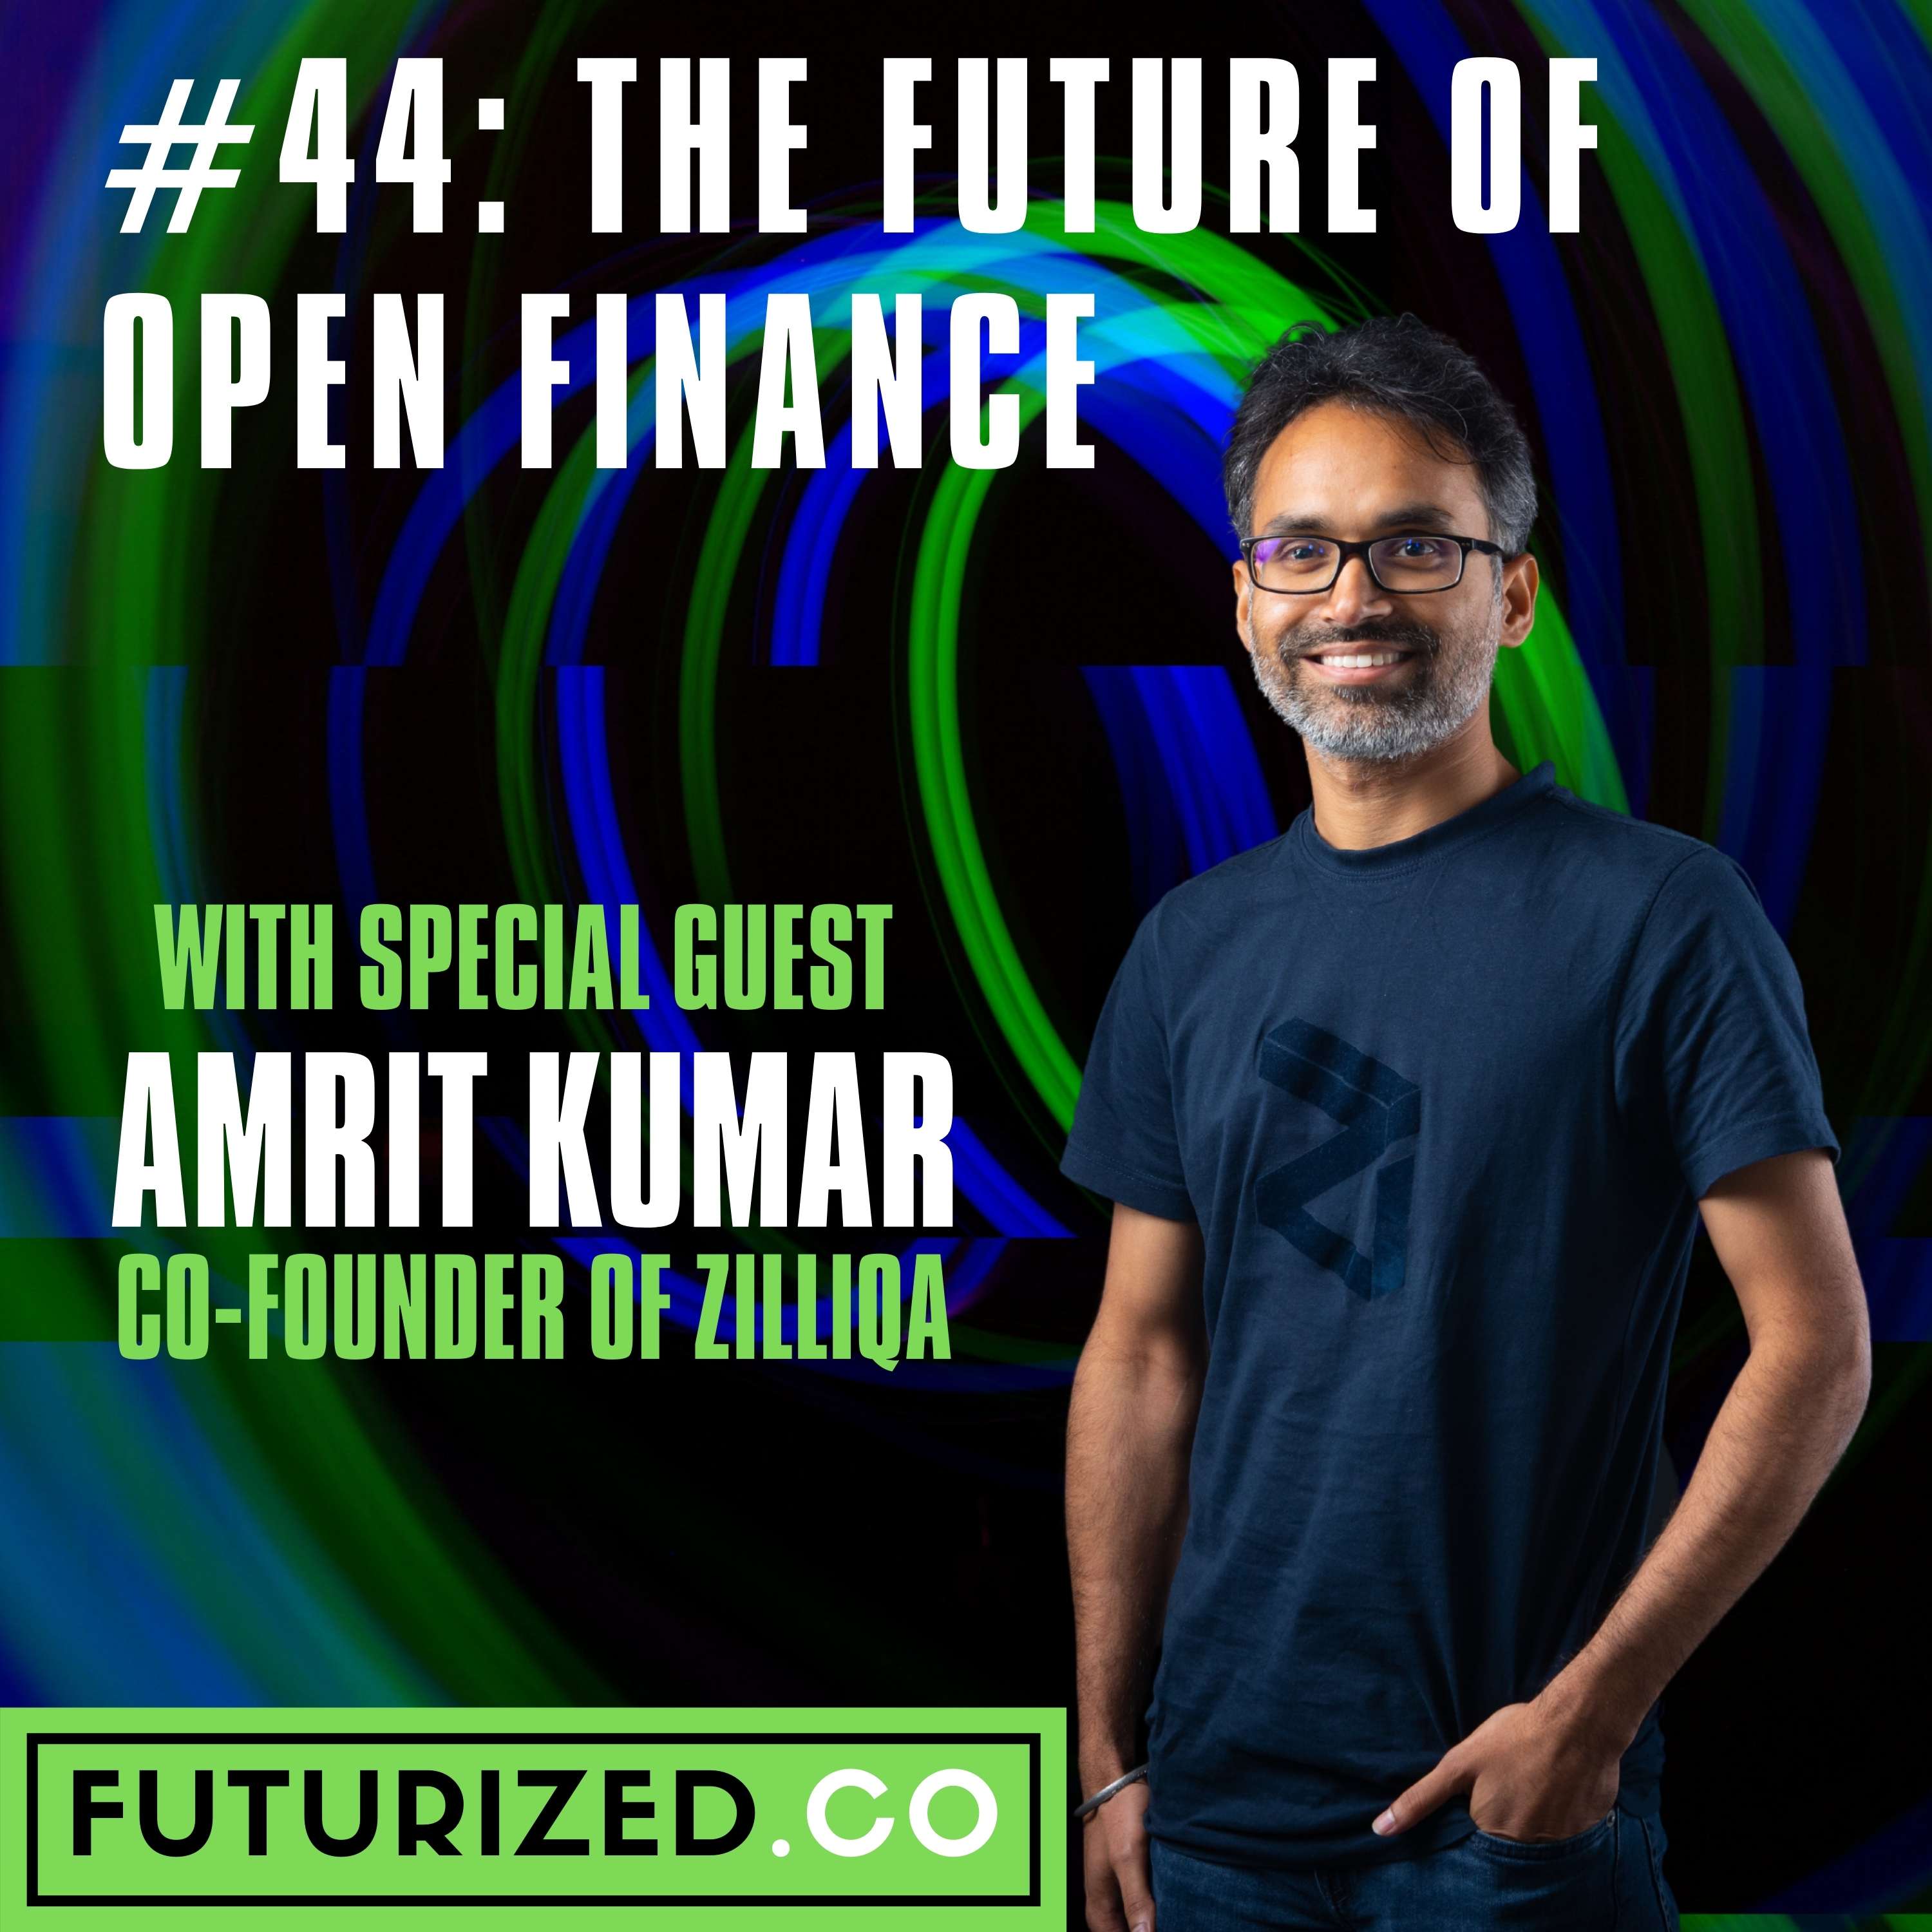 The Future of Open Finance Image